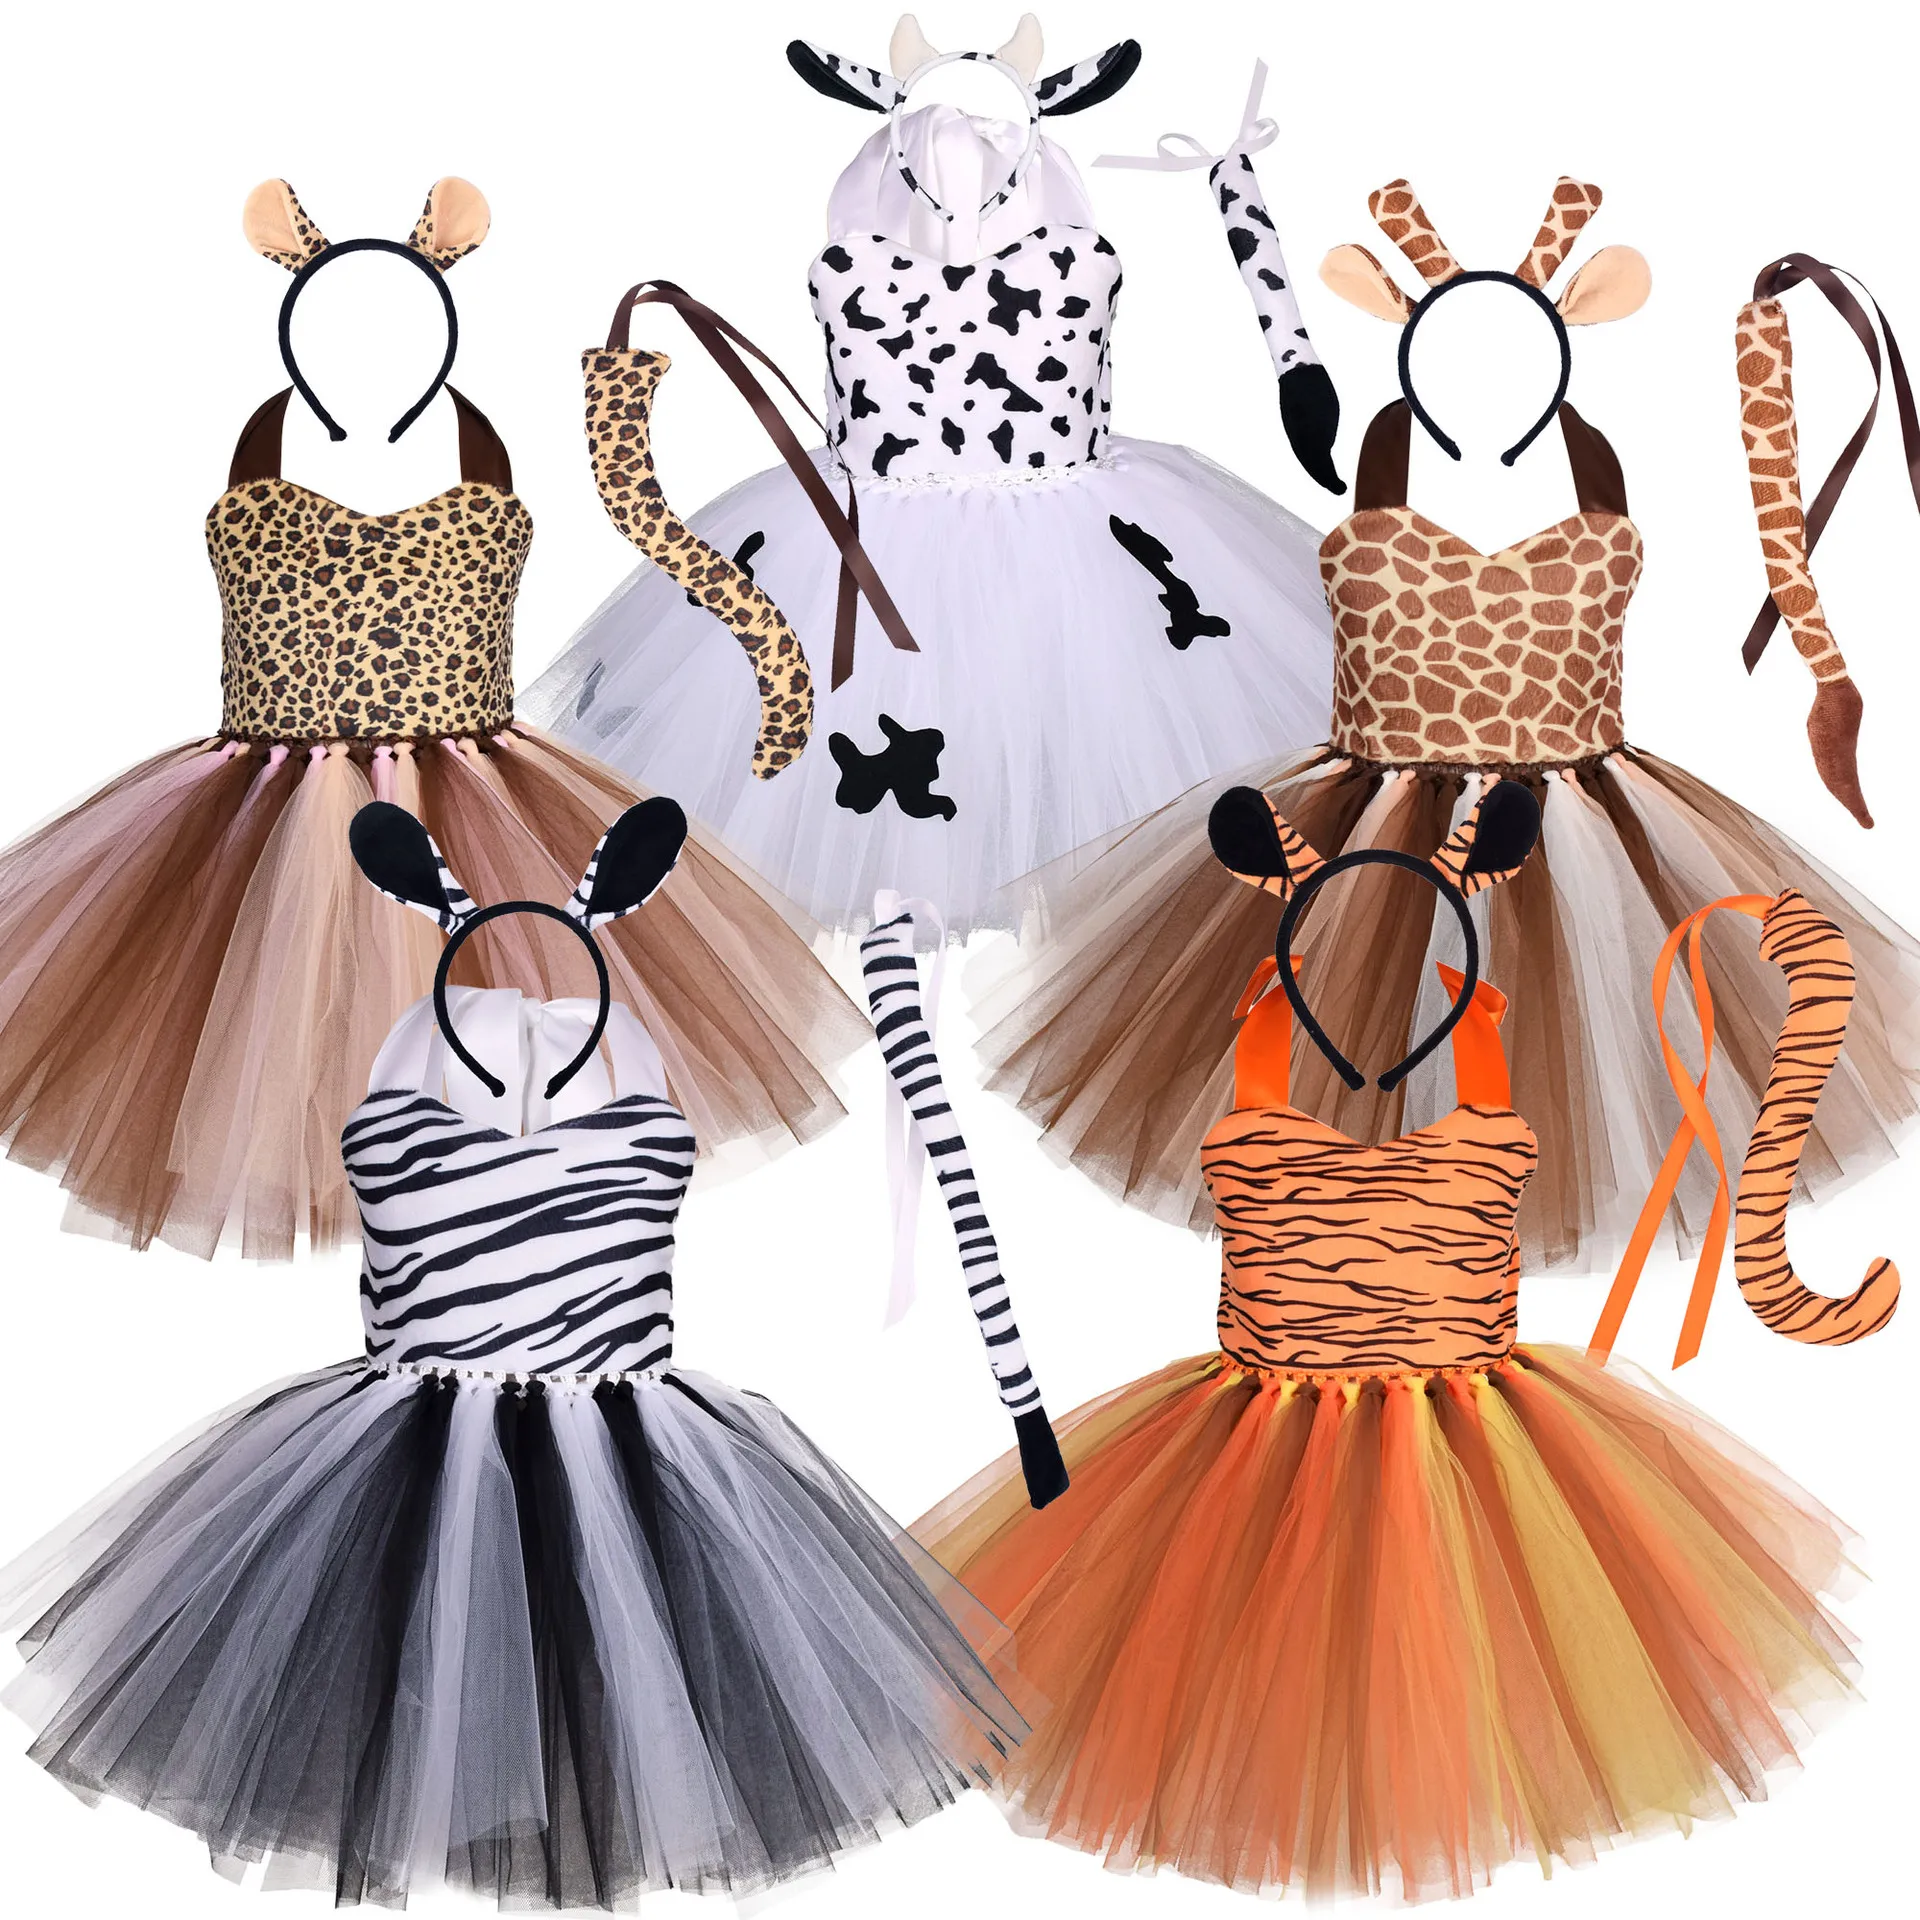 

Animal Leopard Girls Tutu Dress Kids Outfit Zoo Cosplay Giraffe Tiger Cow Leopard Costumes Performance Birthday Jungle Party